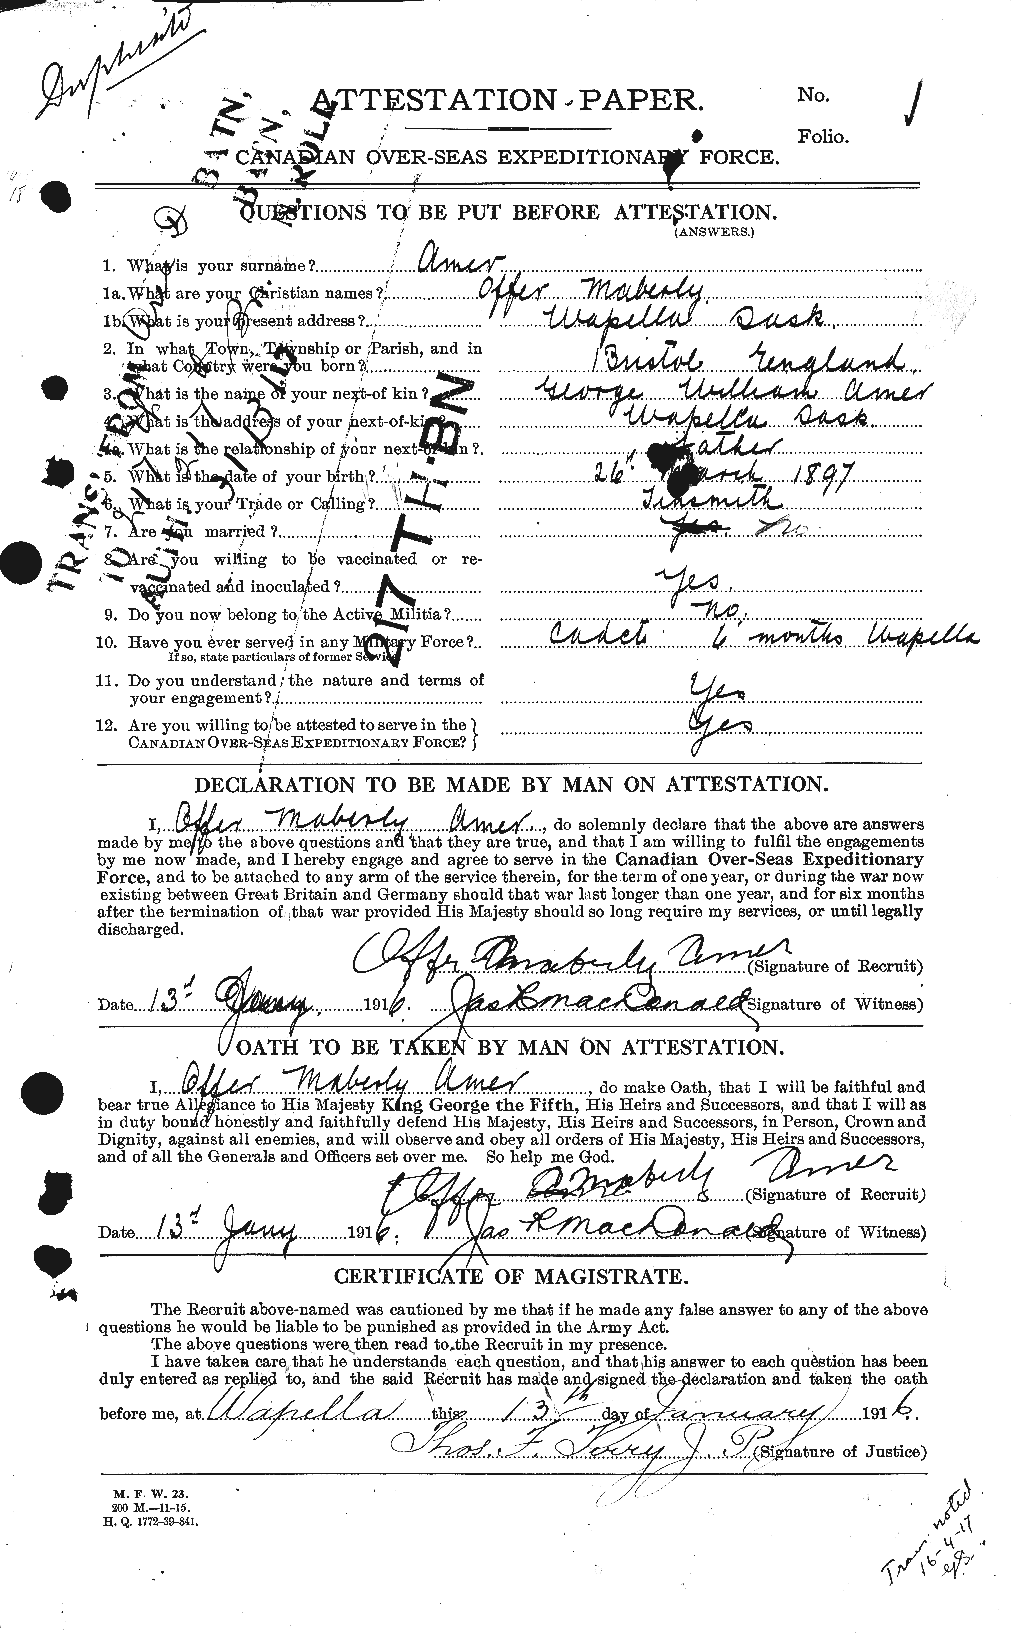 Personnel Records of the First World War - CEF 208886a